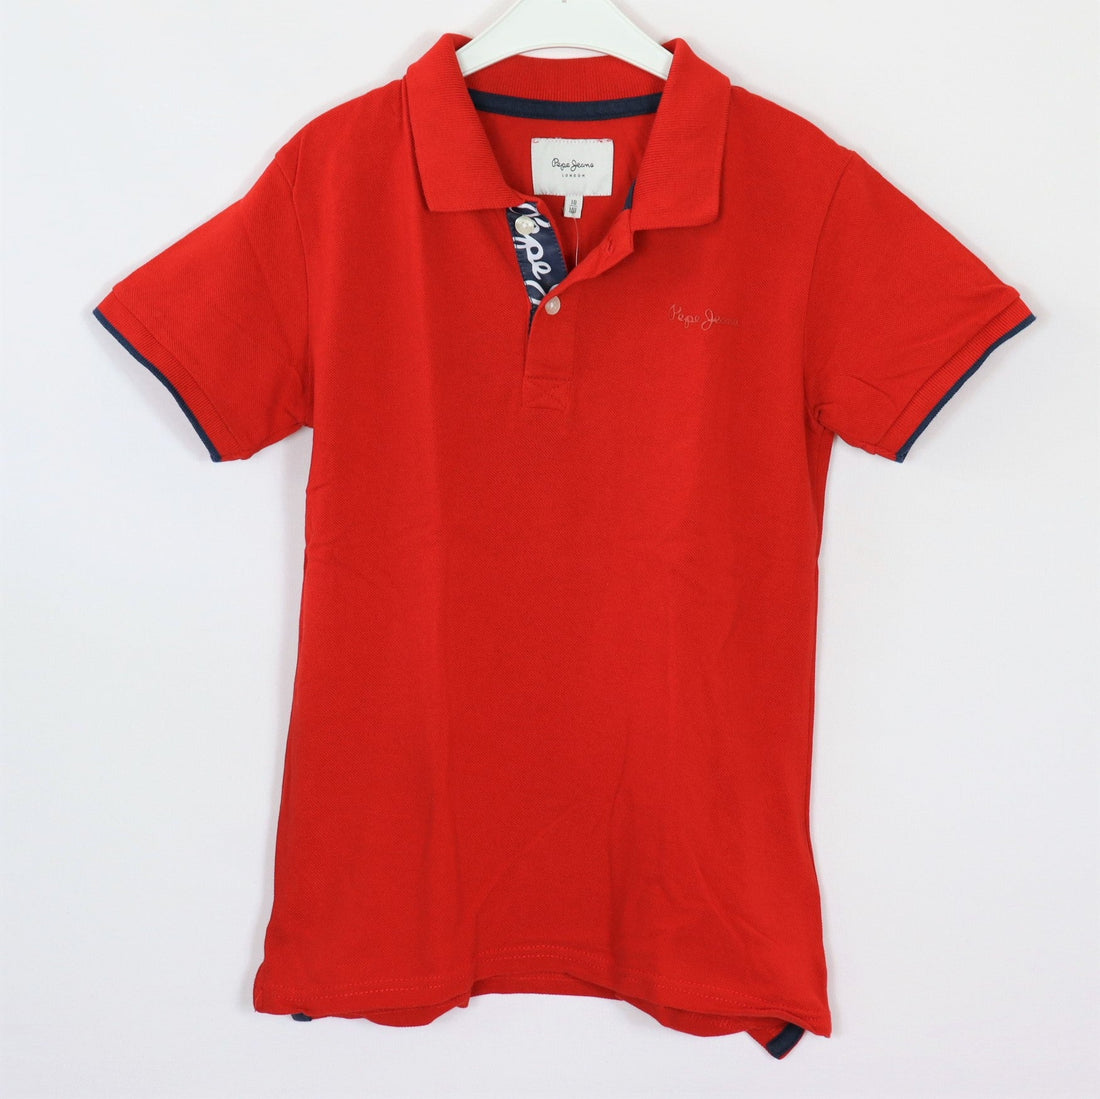 T-Shirt - Pepe Jeans - Polo - 140 - rot - Logo - Boy - sehr guter Zustand